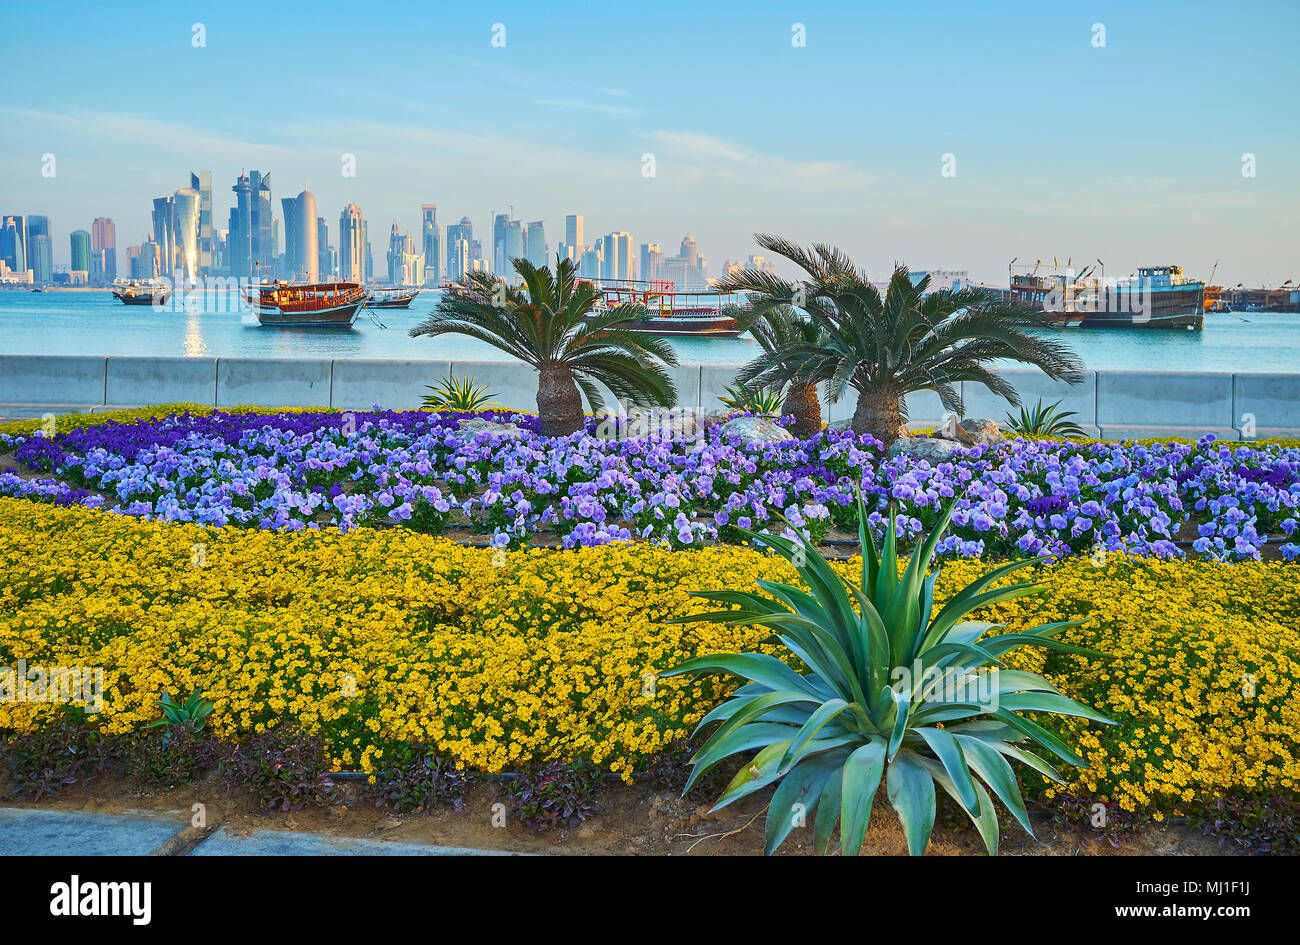 The Corniche embankment is decorated with beautiful flower beds and palm alley, stretching along the coast of Persian Gulf, Doha, Qatar. Stock Photo